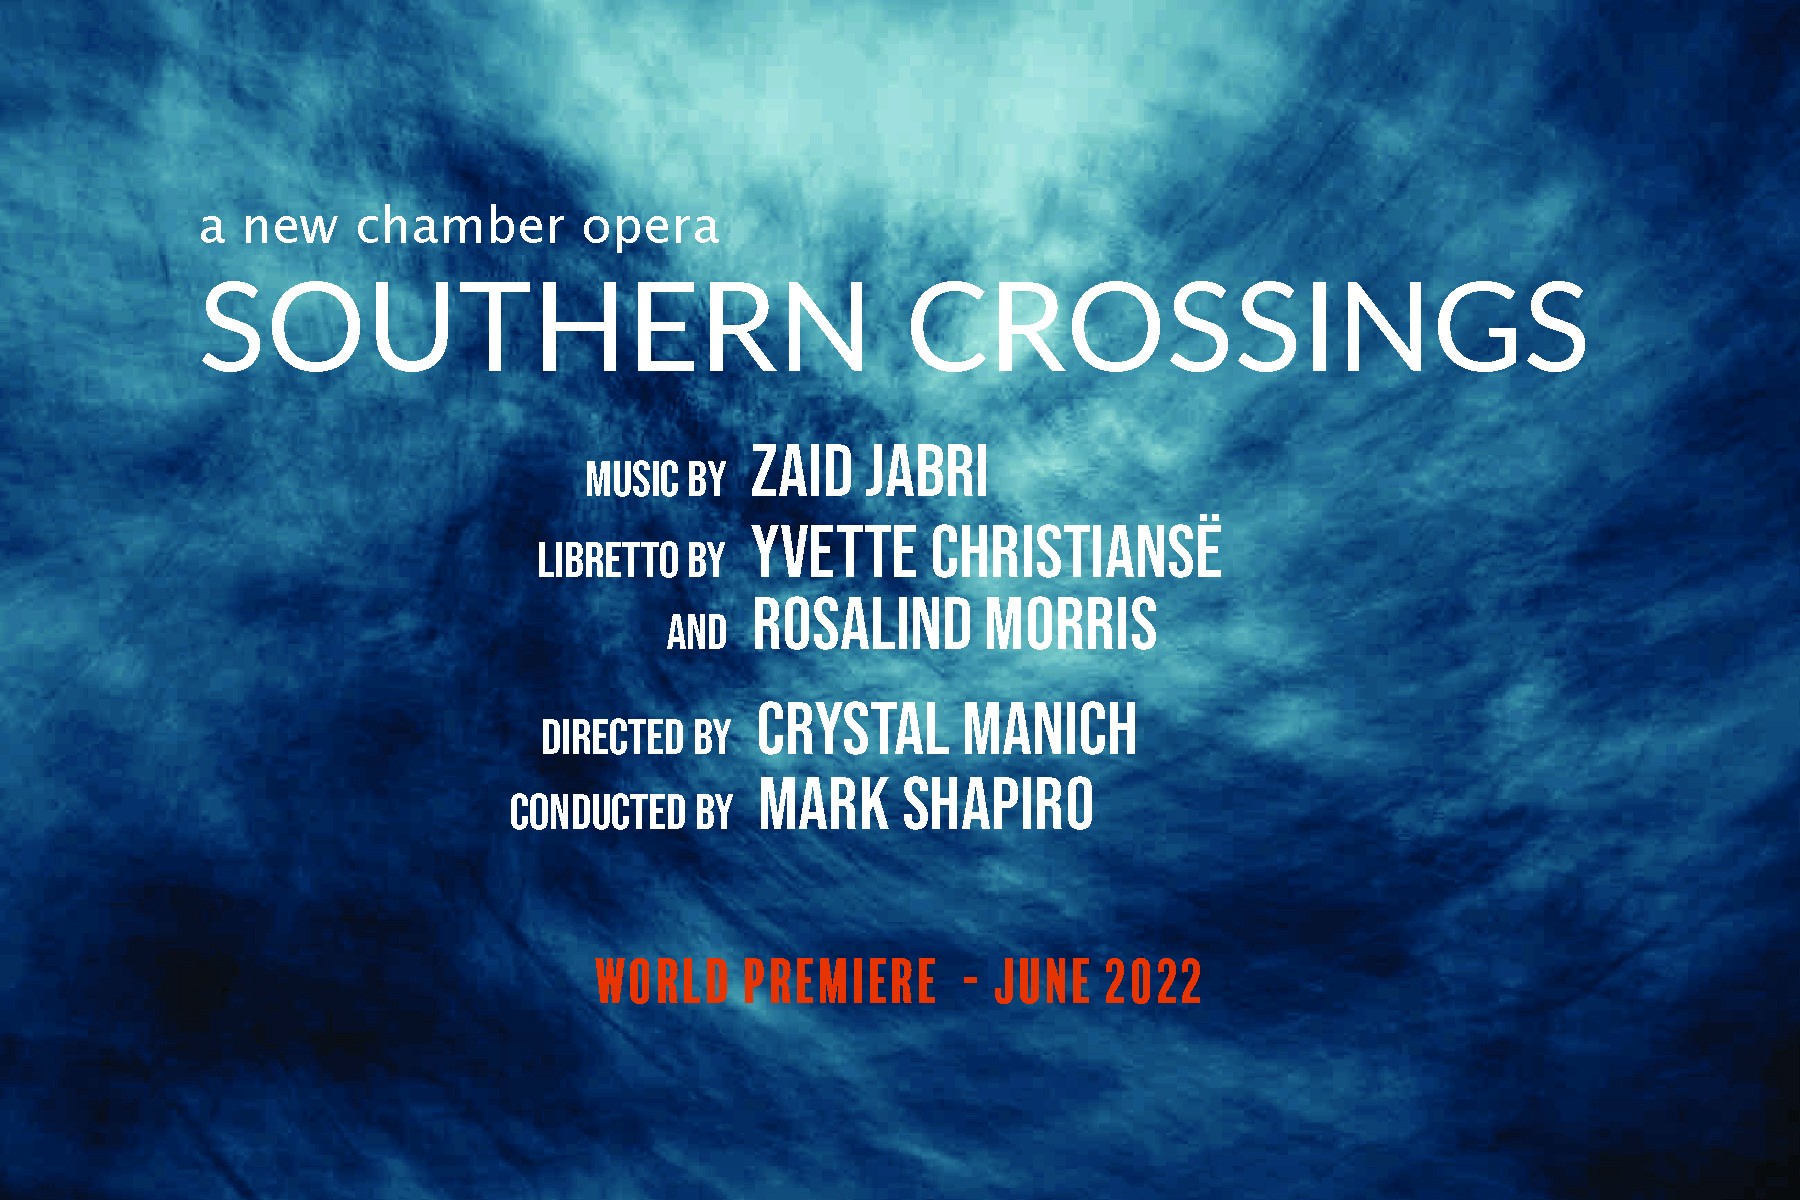 postcard for Southern Crossings opera